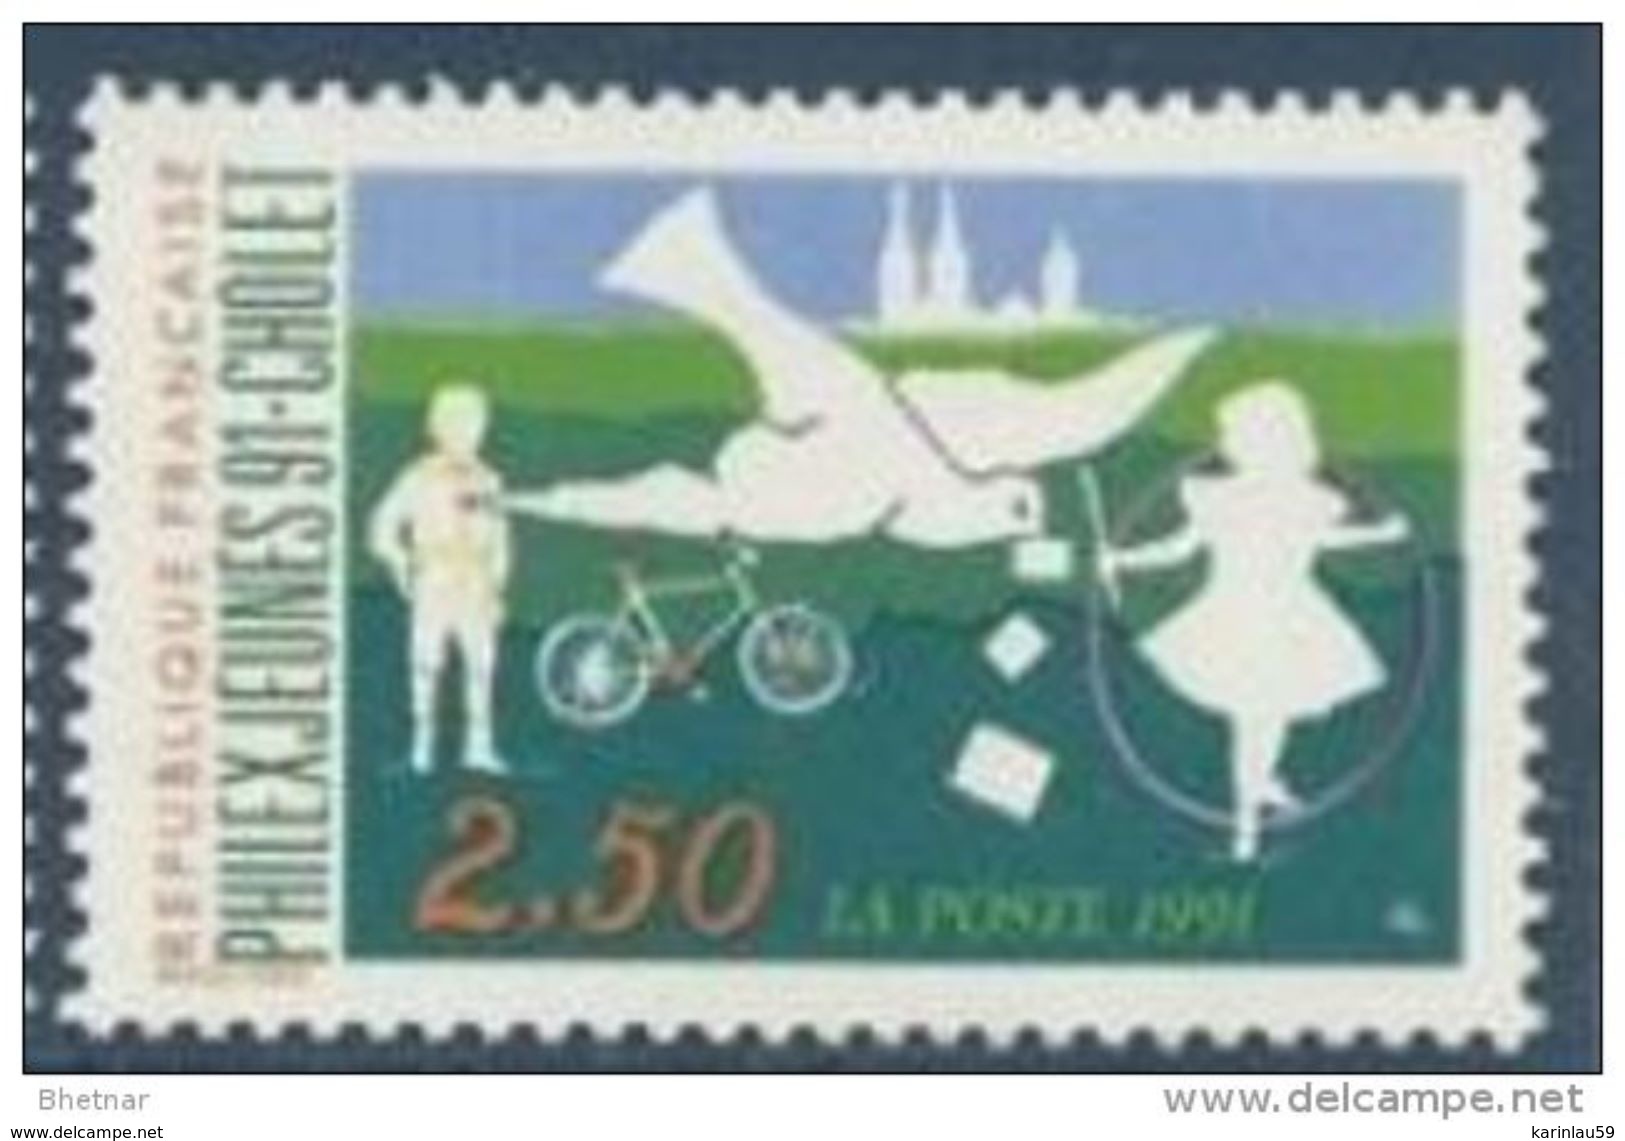 Timbre France Yt 2690 " Philexjeunes 91-Cholet " 1991 Neuf - Unused Stamps